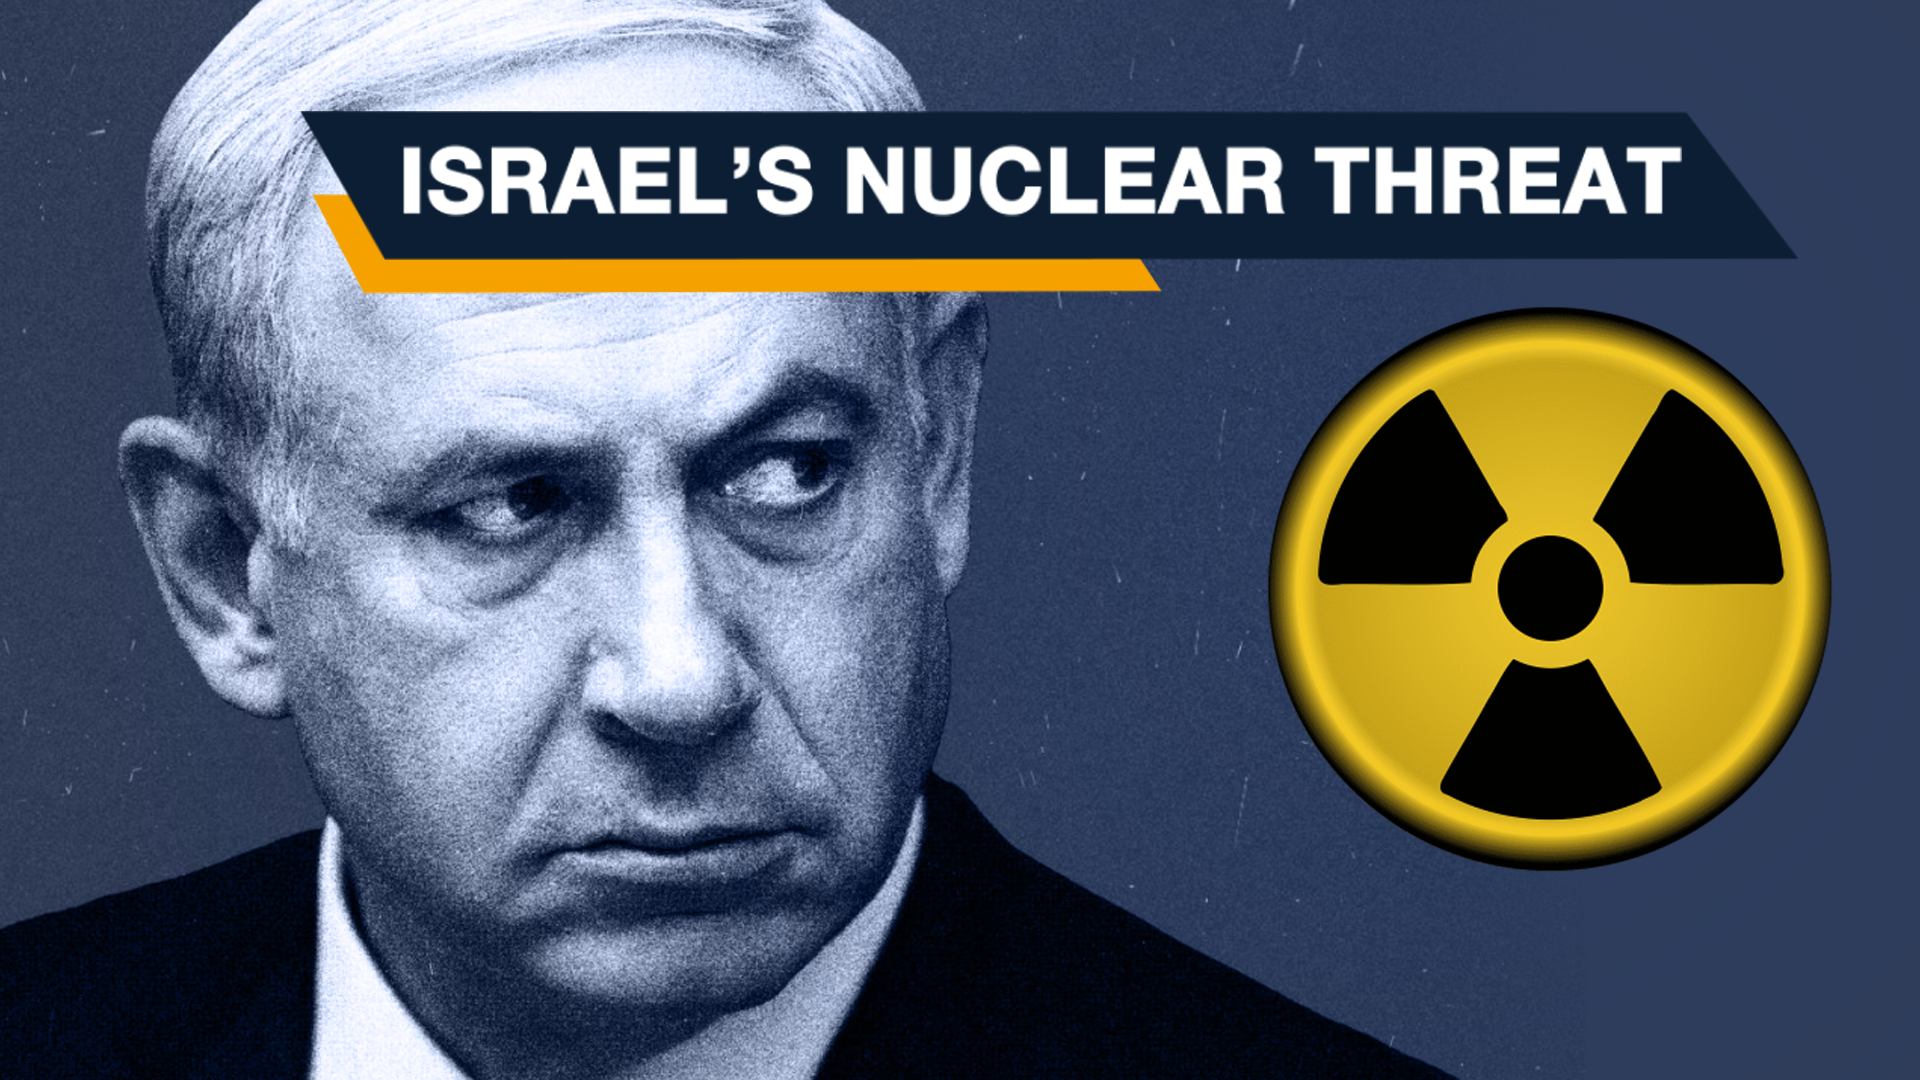 Israel's threat of attacking Iran's nuclear facilities